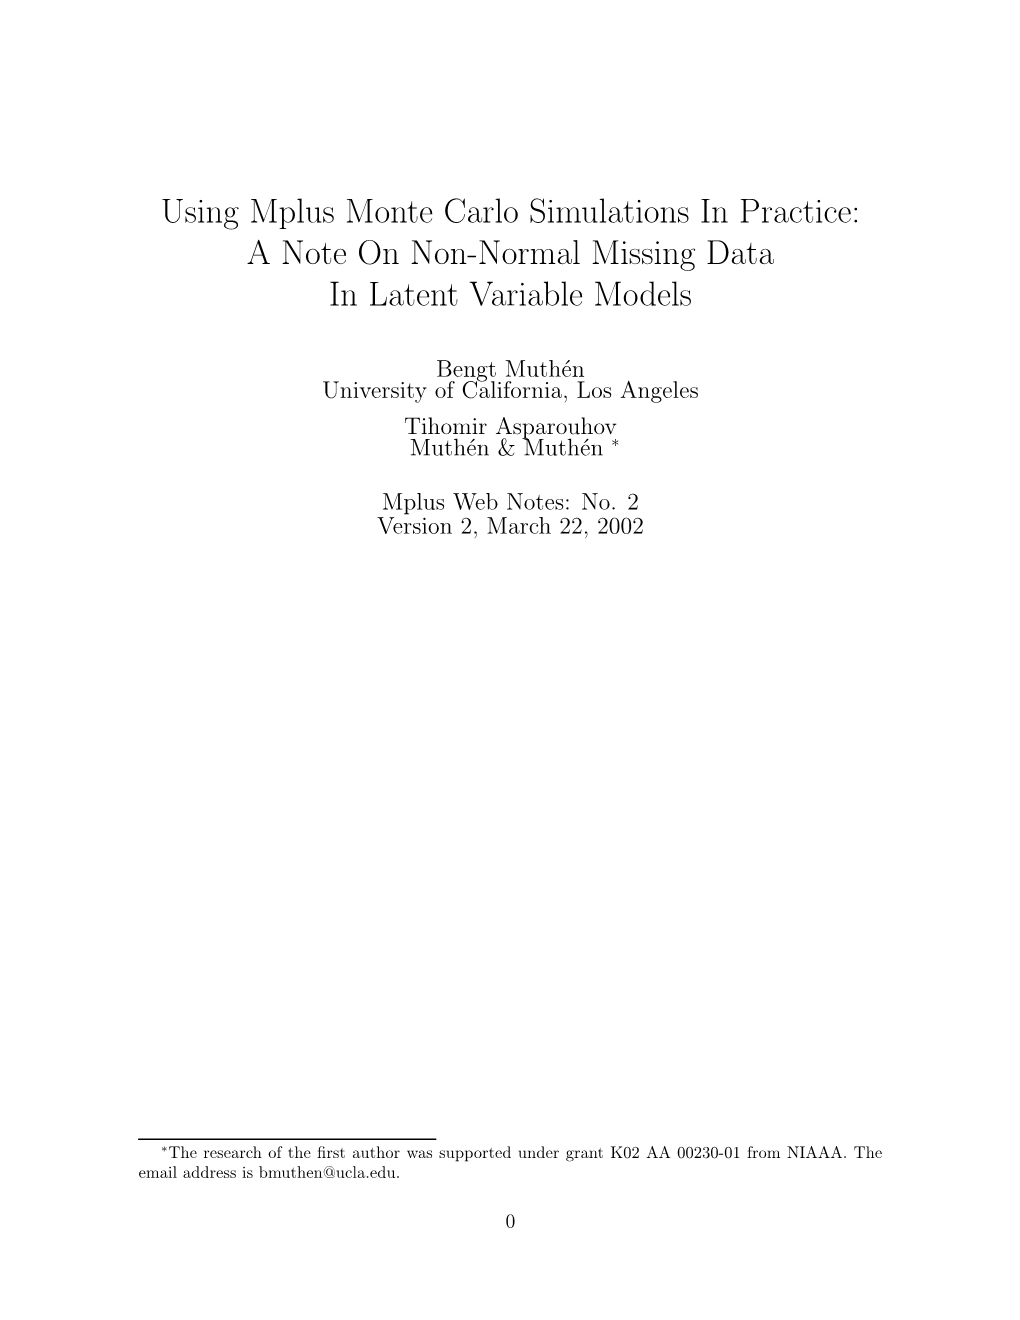 Using Mplus Monte Carlo Simulations in Practice: a Note on Non-Normal Missing Data in Latent Variable Models